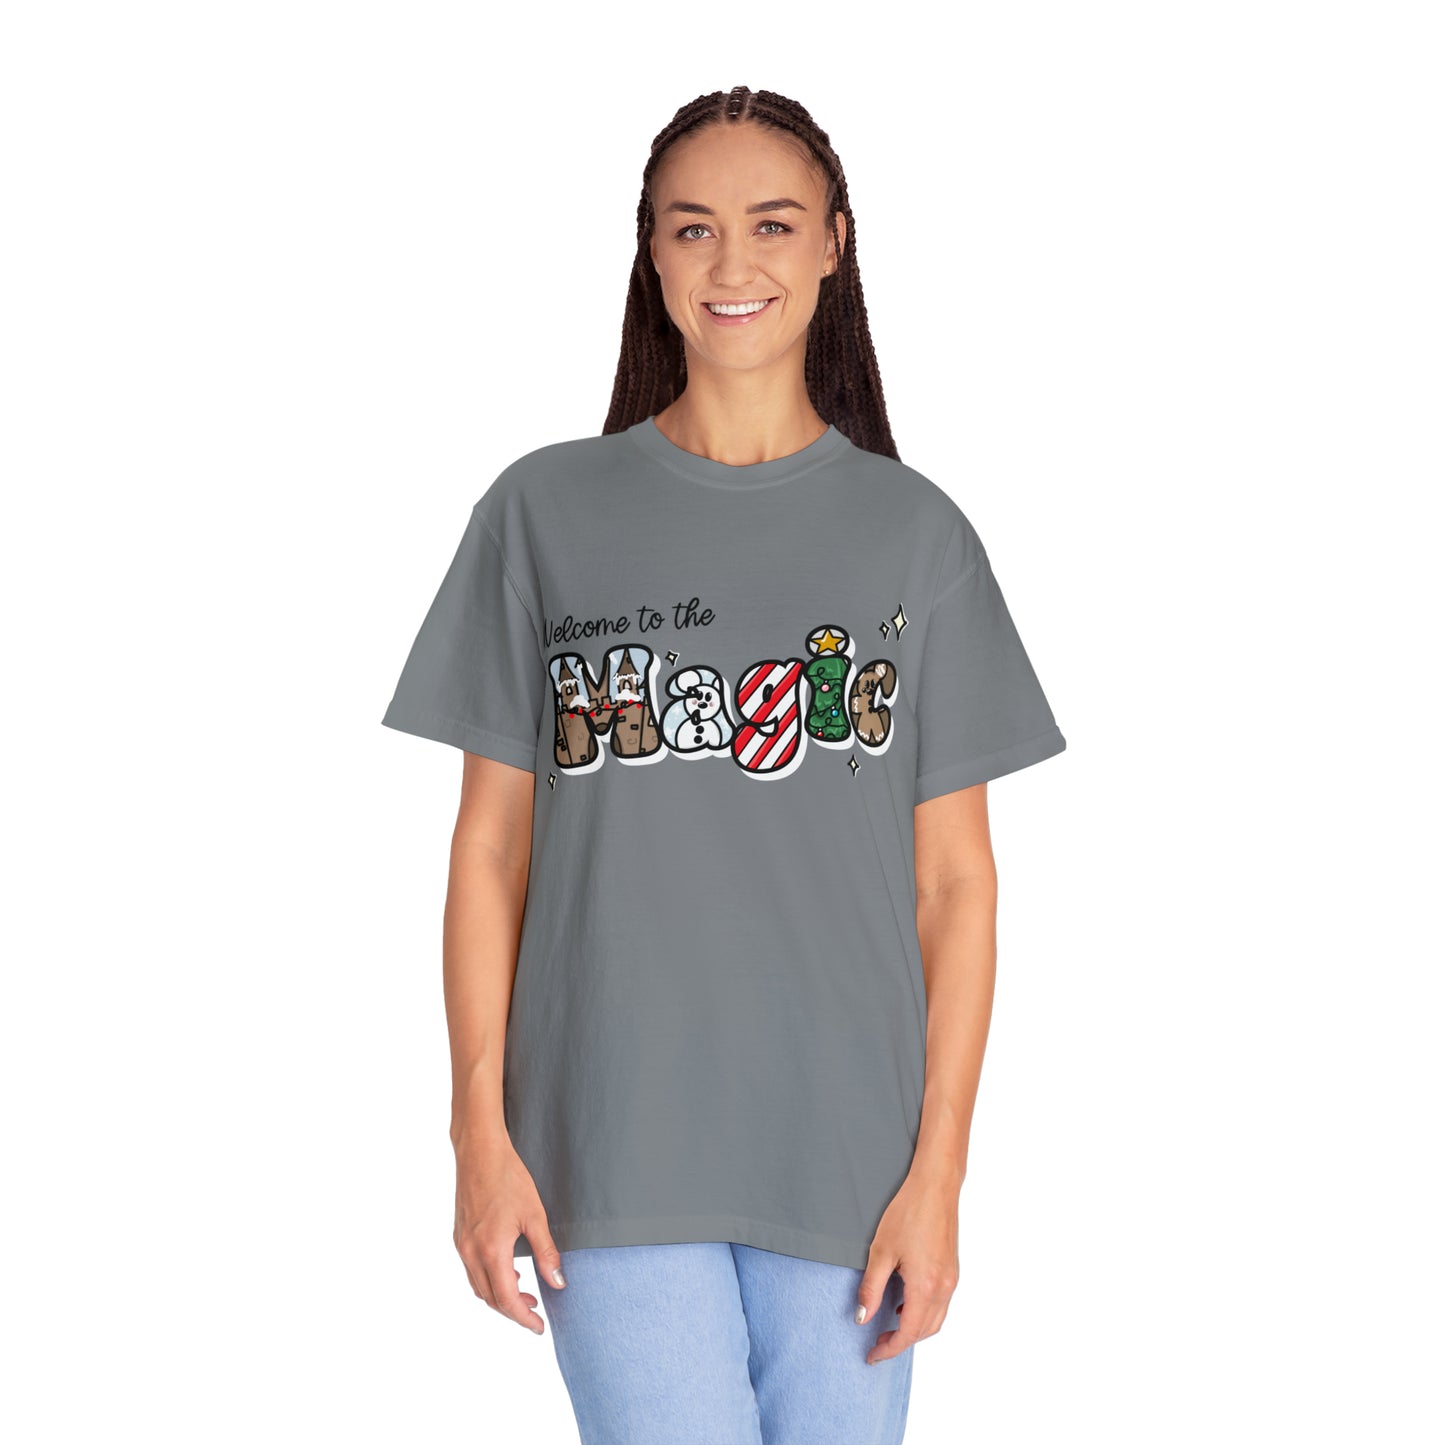 Adult Welcome to the ^Christmas Magic Tee - Comfort Colors